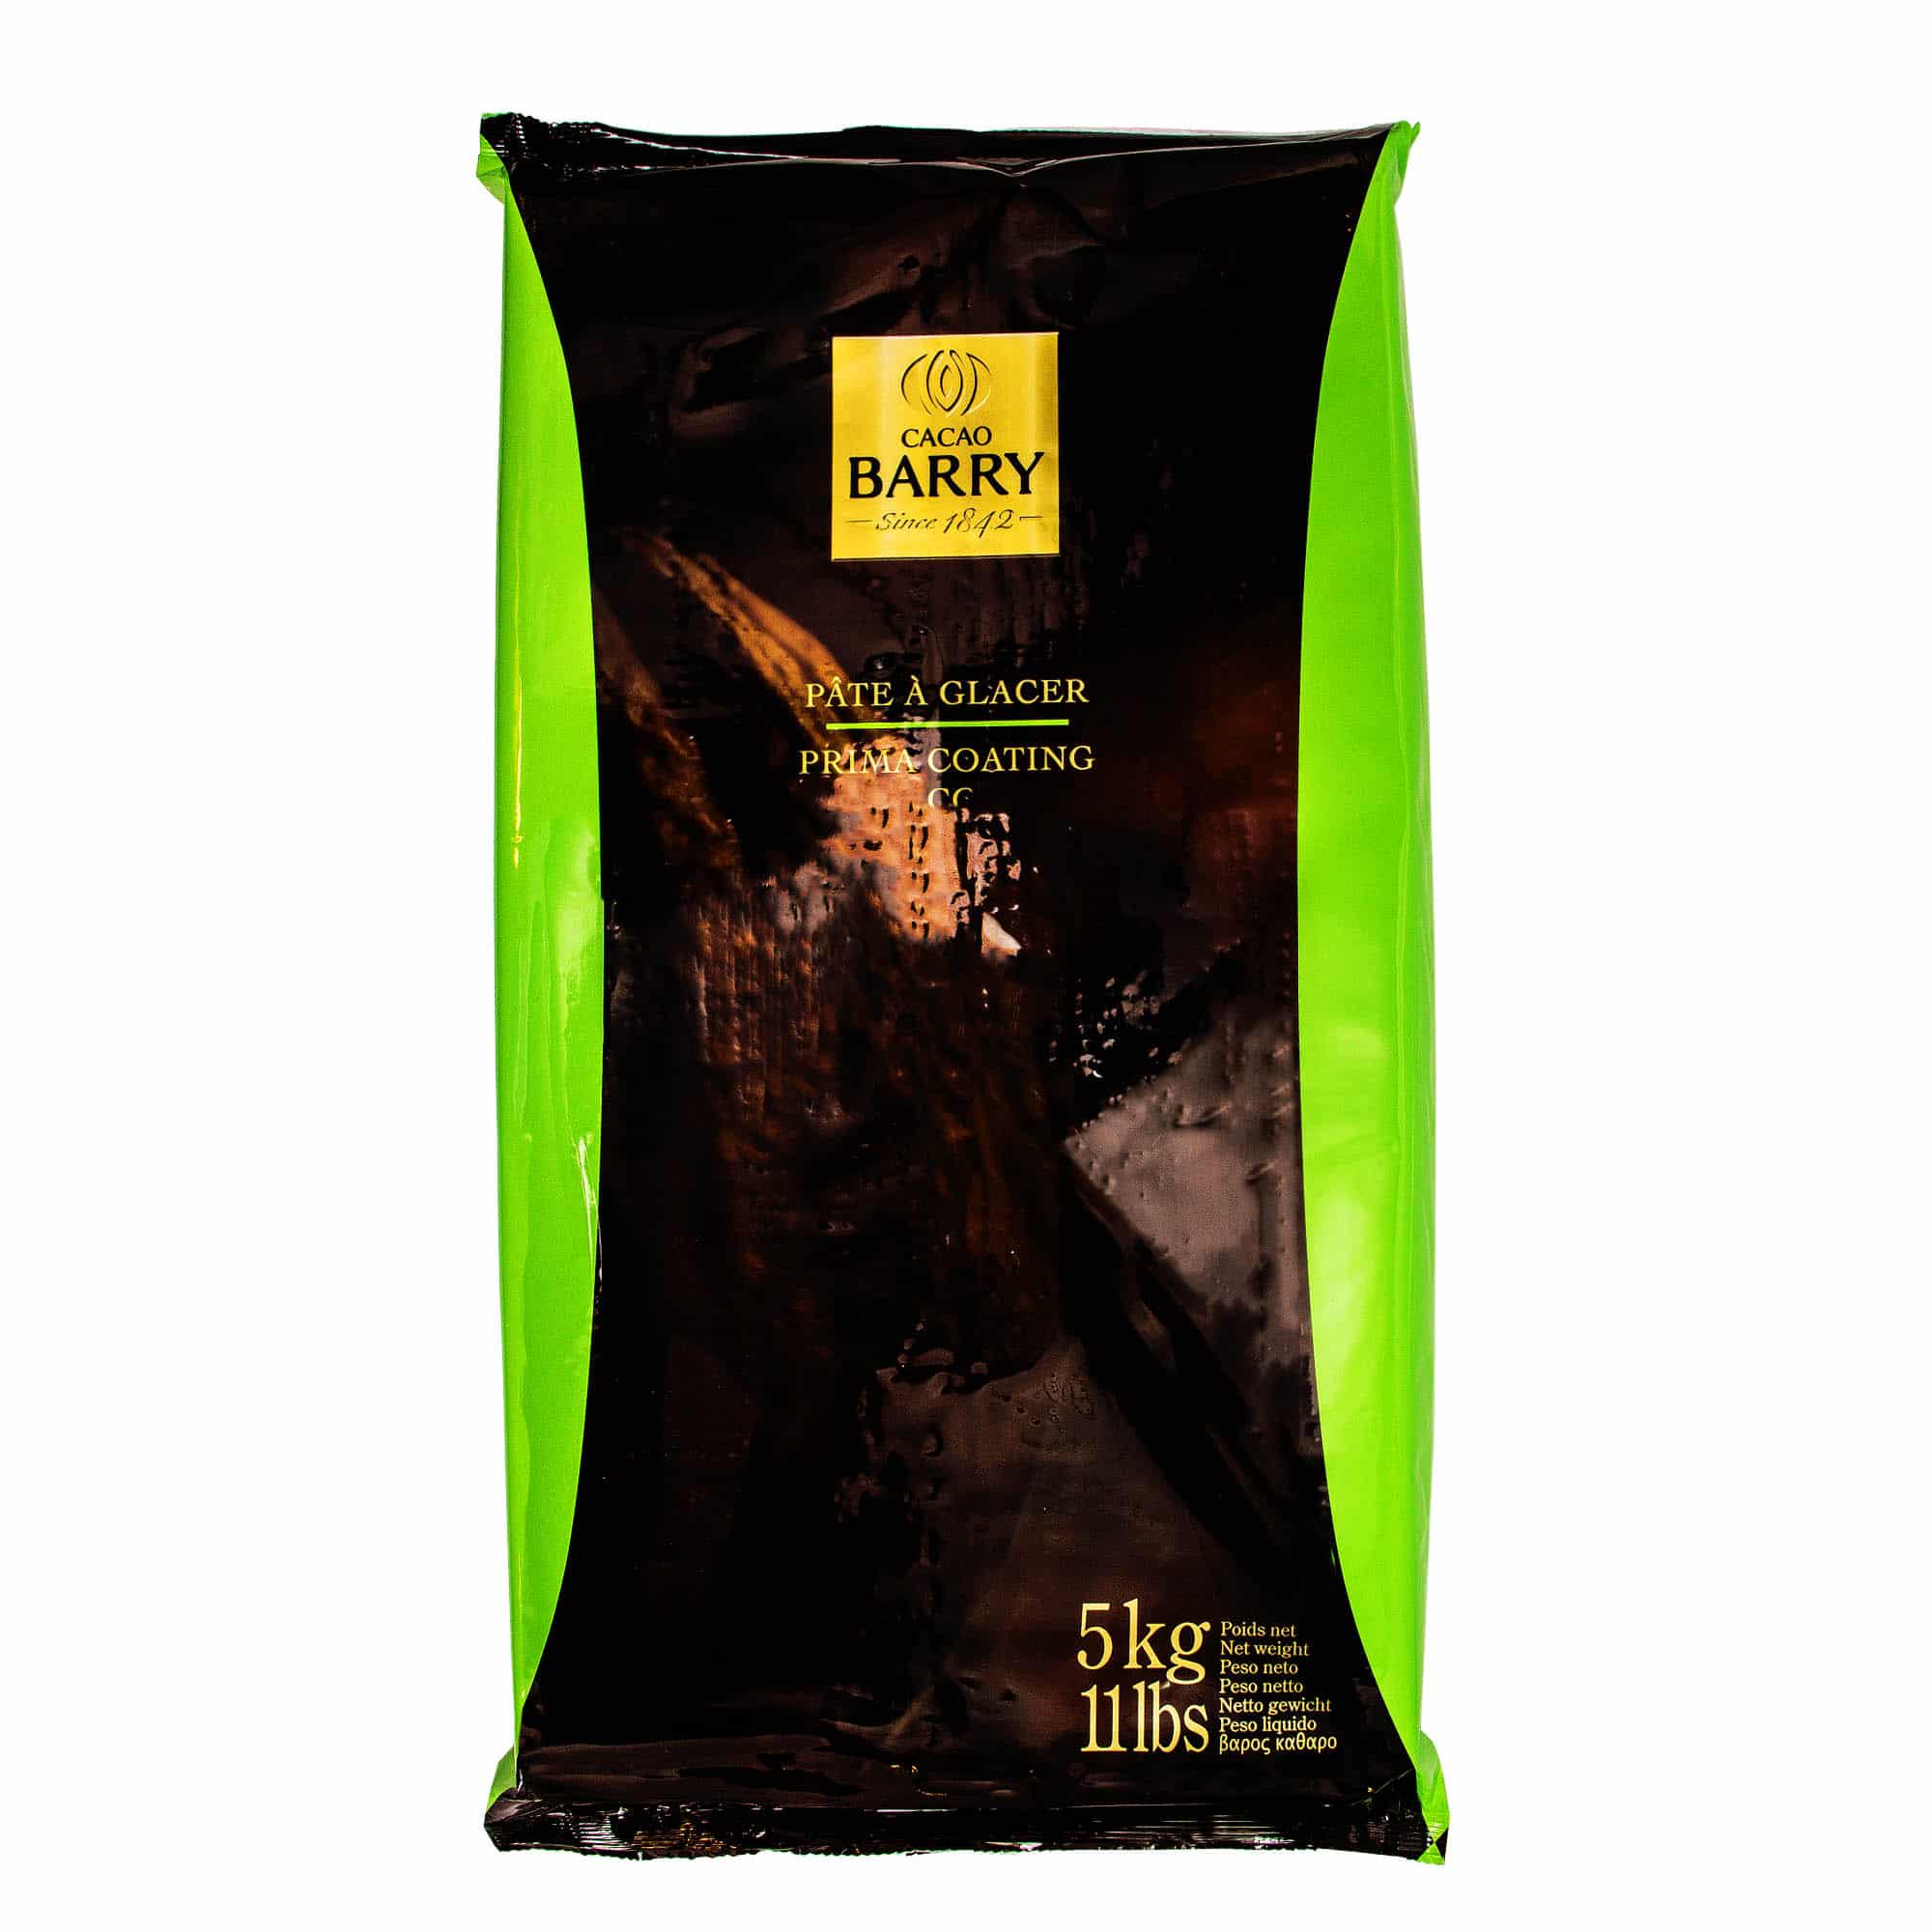 Cacao Barry Pate Glacer Brune Dark Coating Chocolate 11 lb